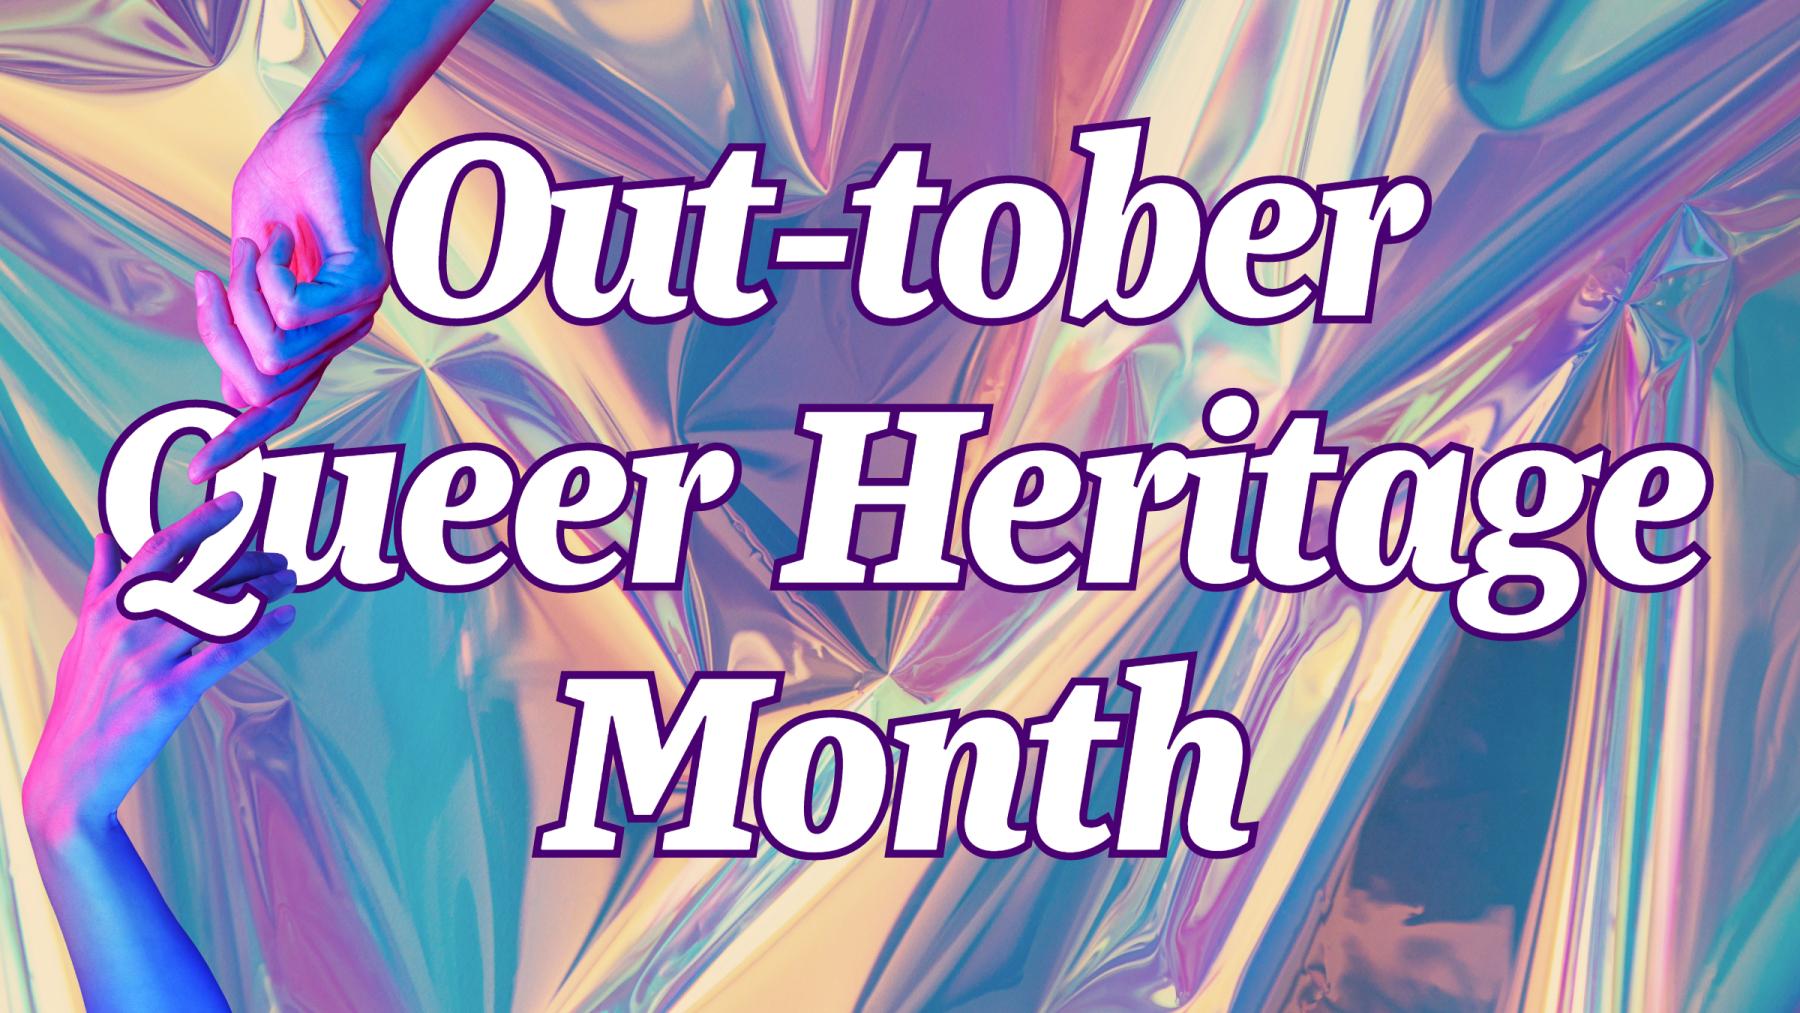 Crumpled chrome background with "Out-tober Queer Heritage Month" in white text that has a purple outline. On the left side, there is a hand reaching down from the top that interlocks fingers with a hand reach up from the bottom. The fingers meet at the letter Q in "Queer".